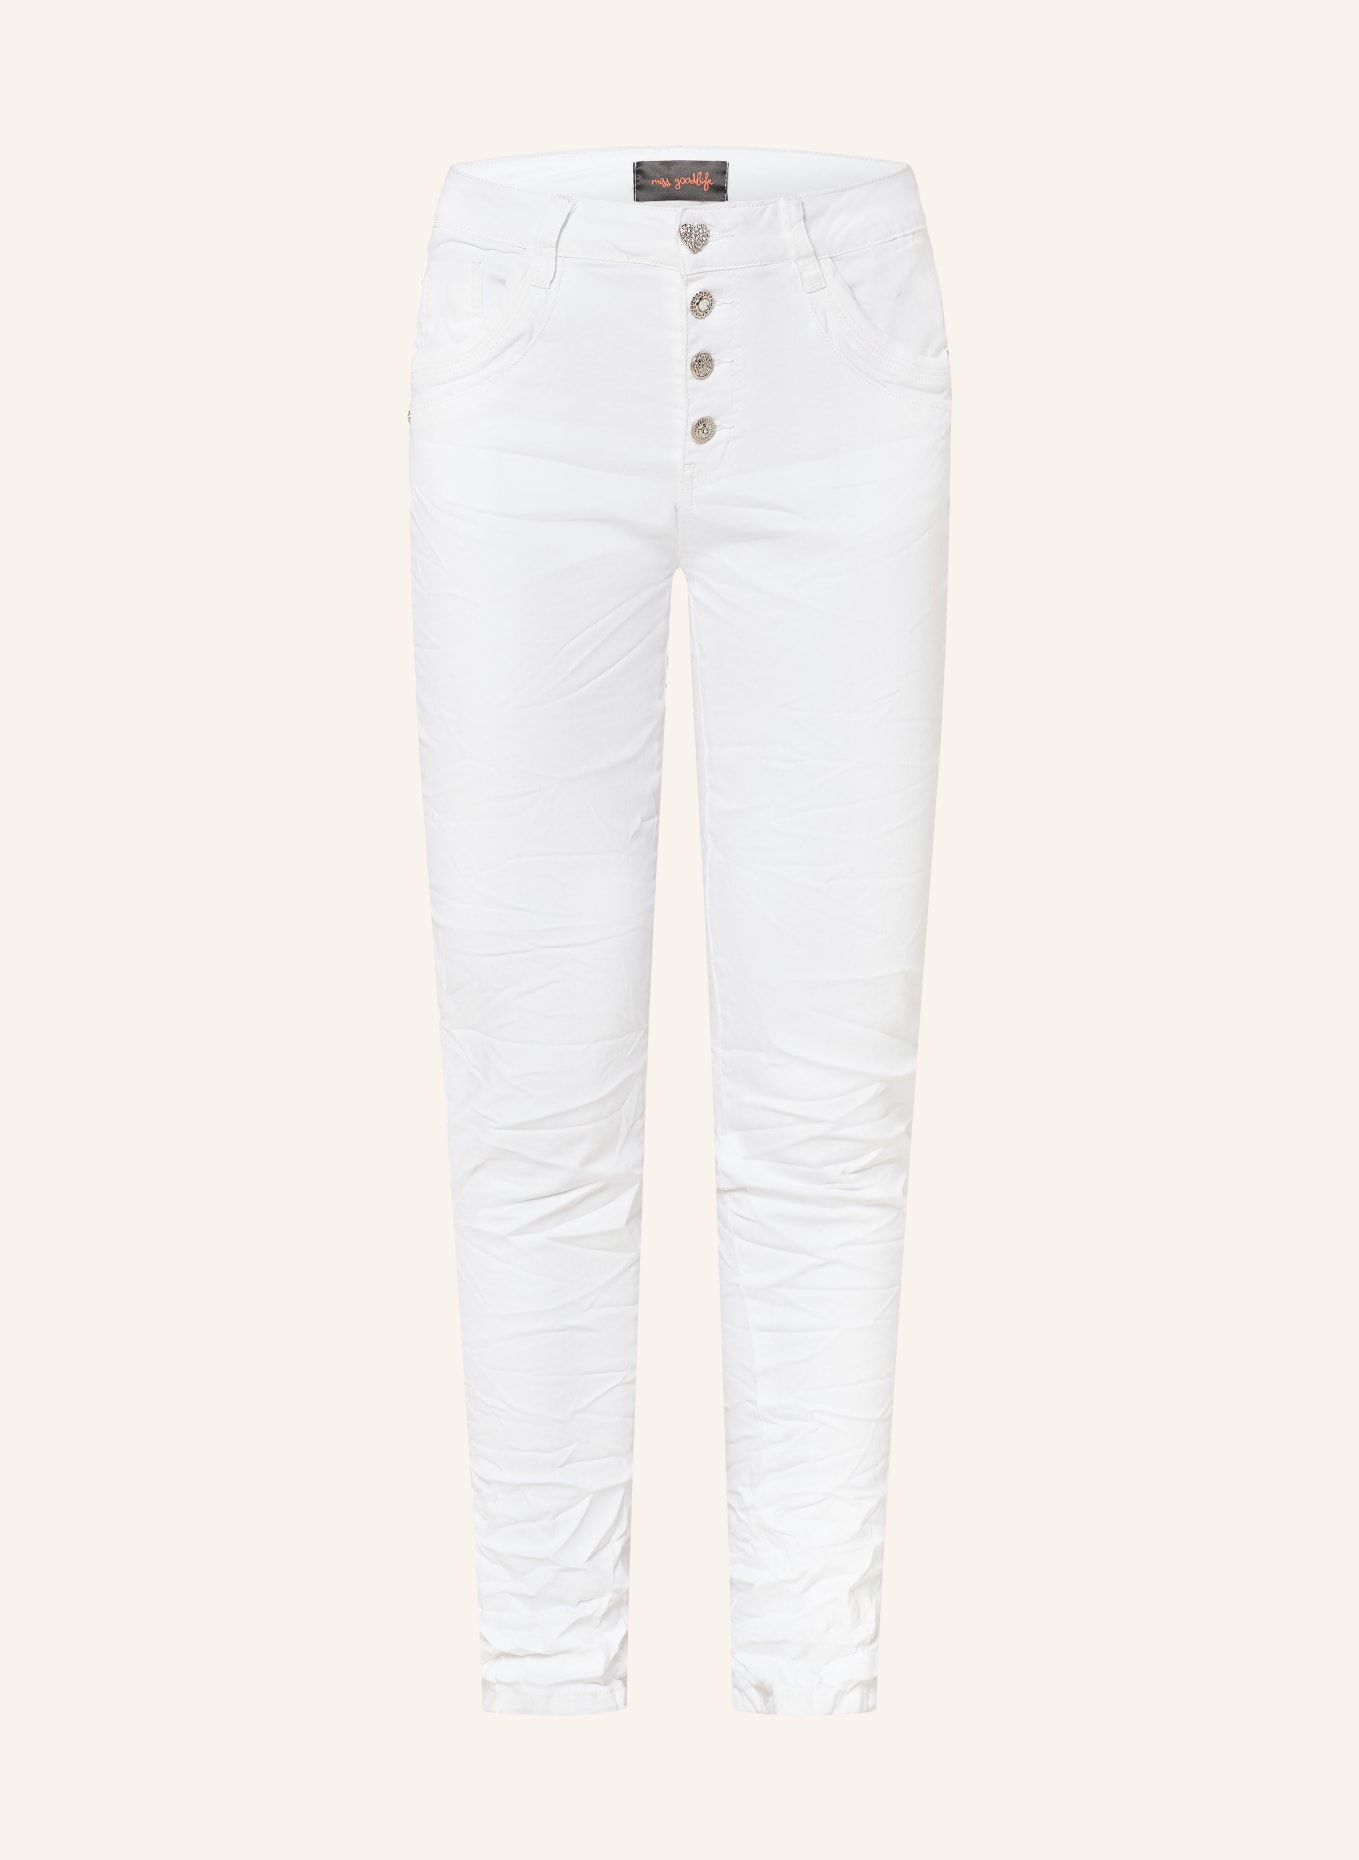 miss goodlife Skinny jeans, Color: WHITE (Image 1)